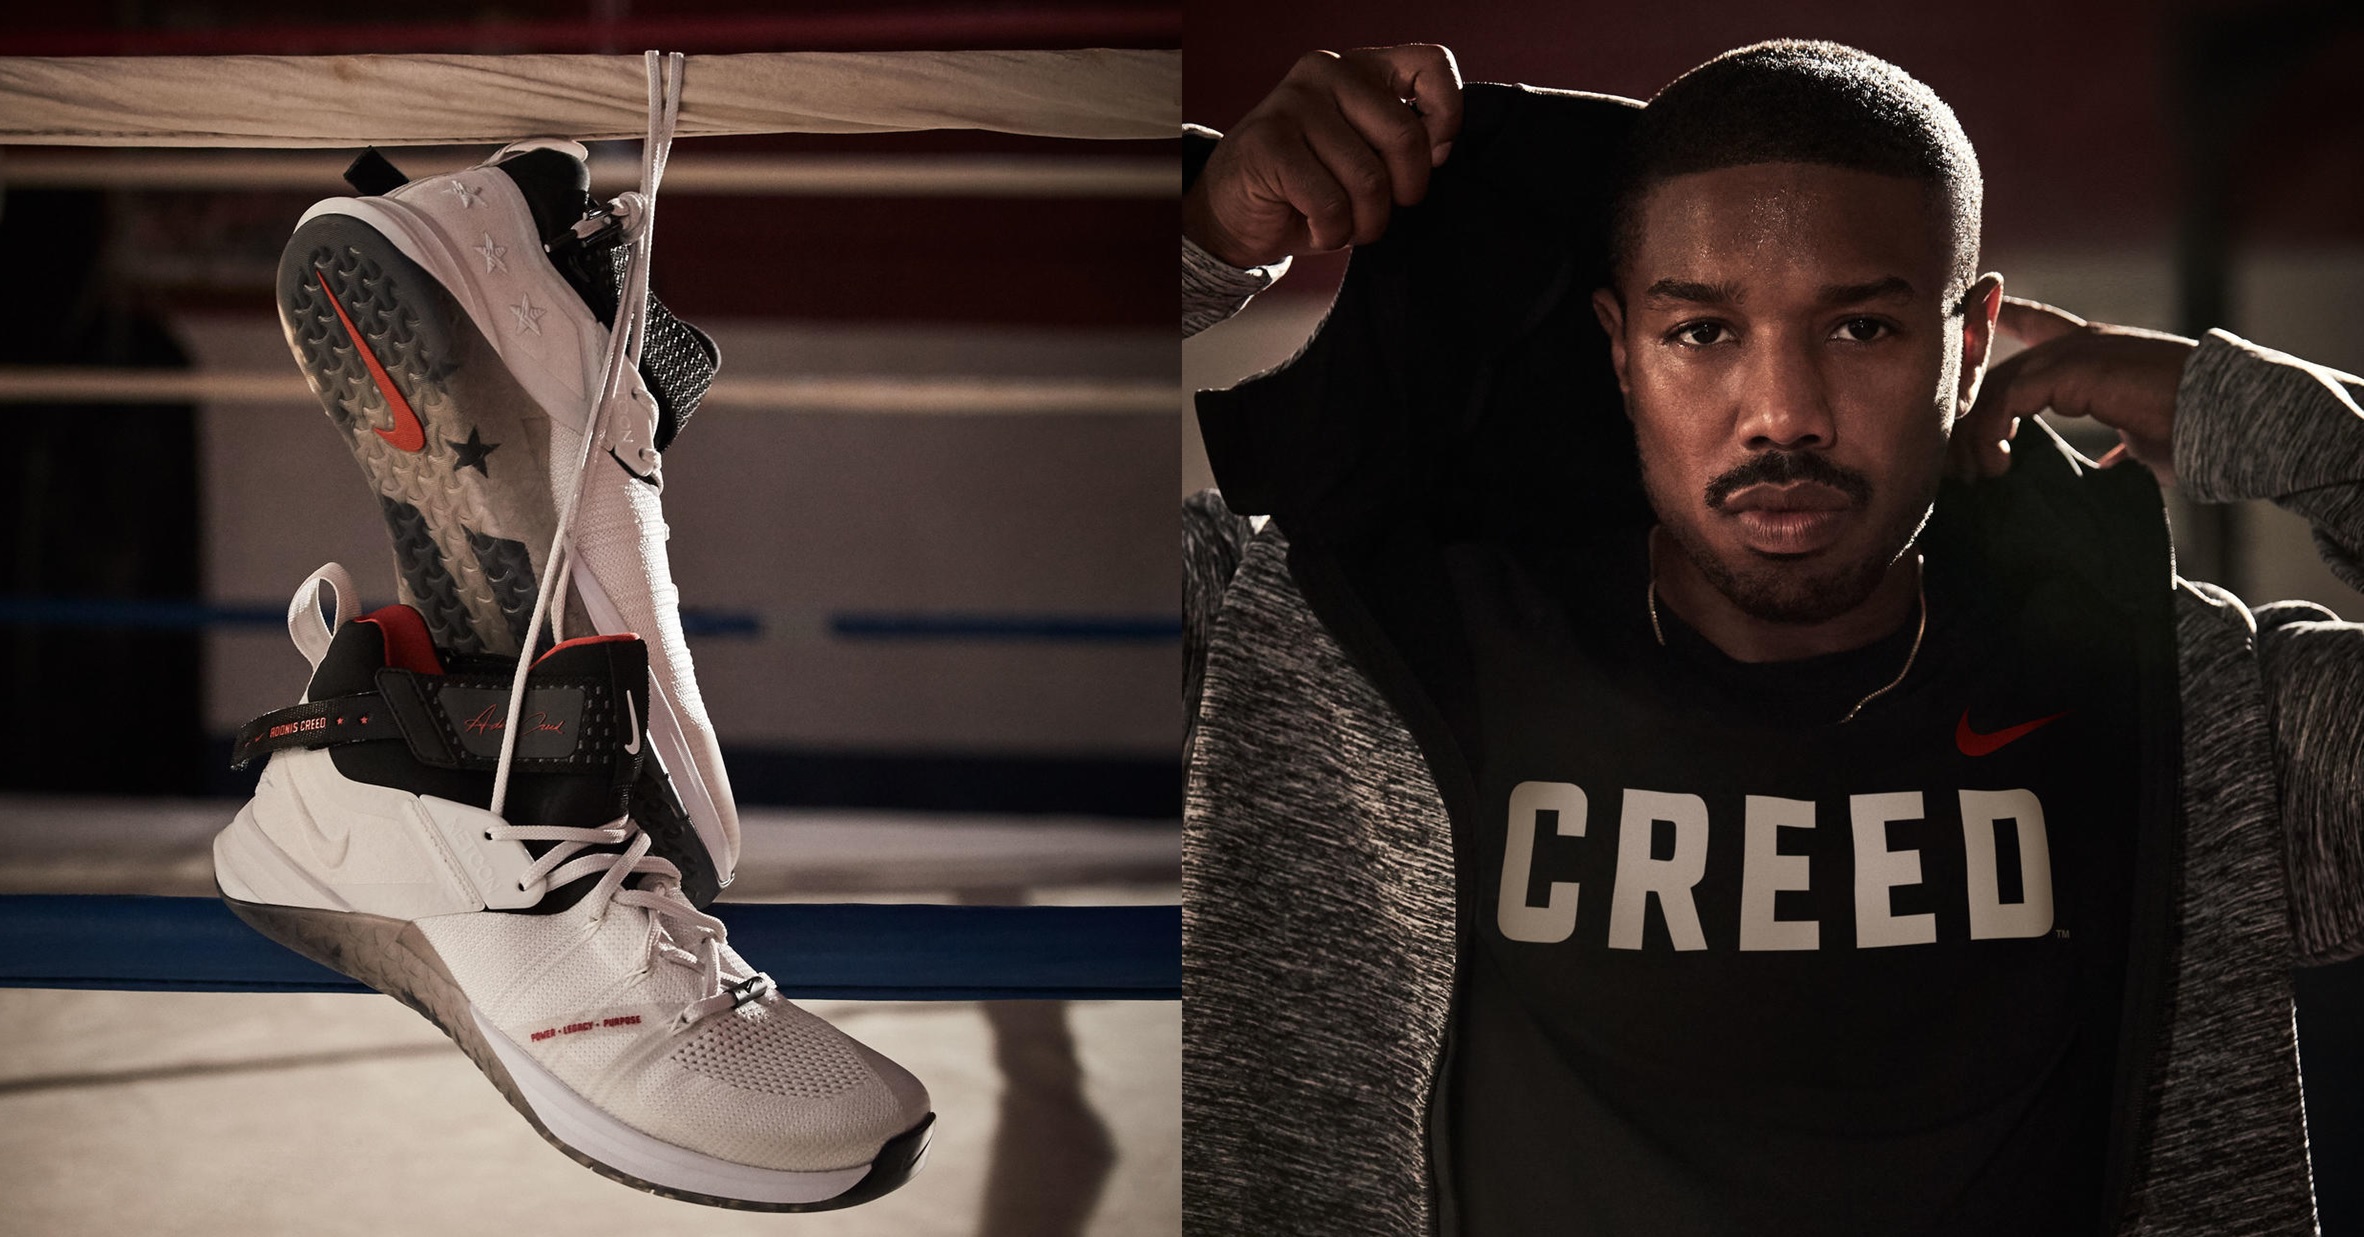 nike adonis creed collection